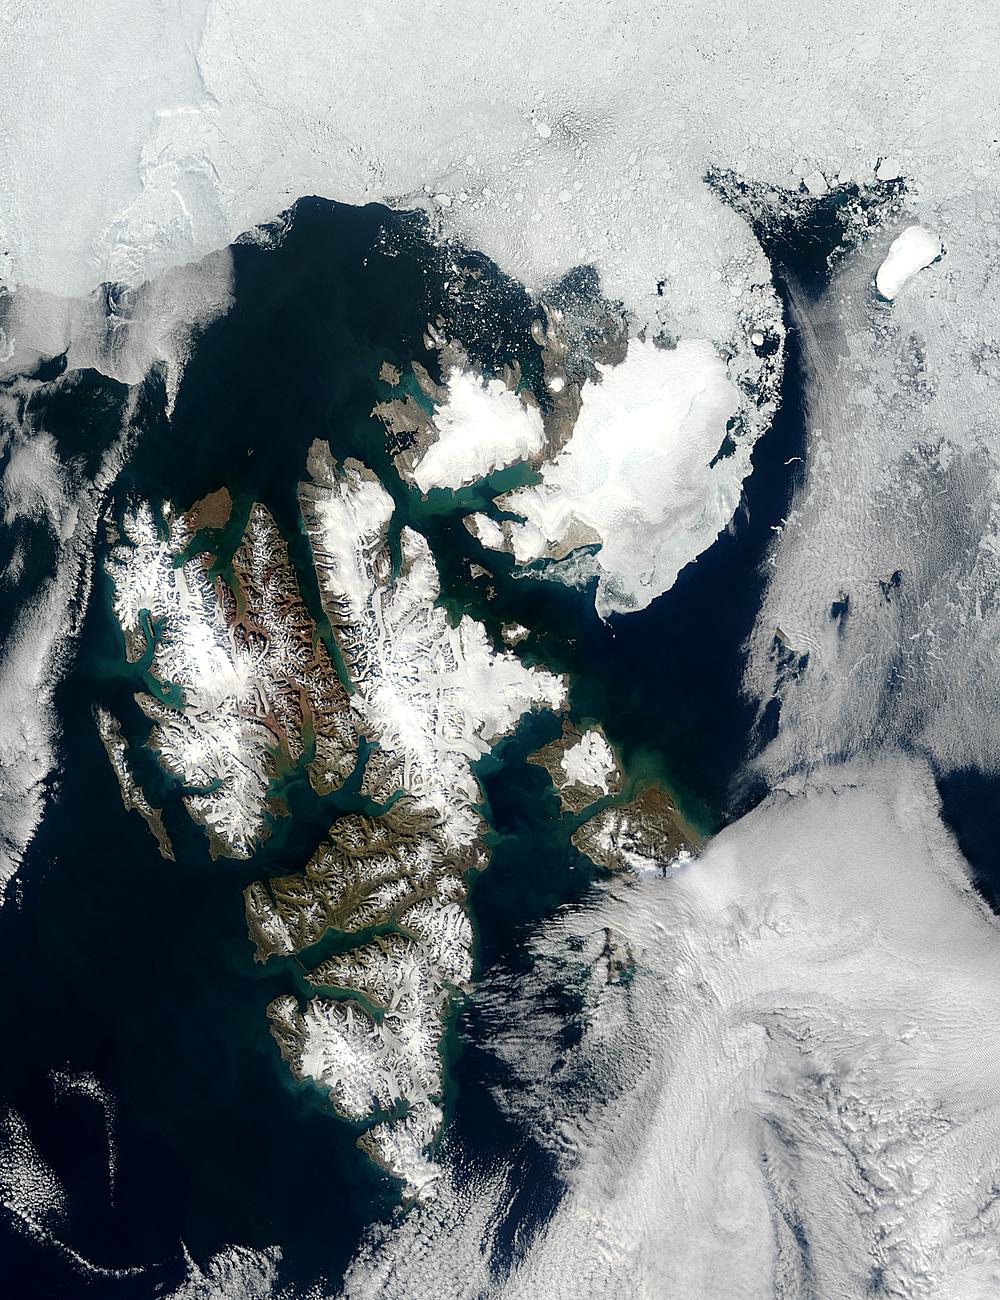 Svalbard, Arctic Ocean - related image preview